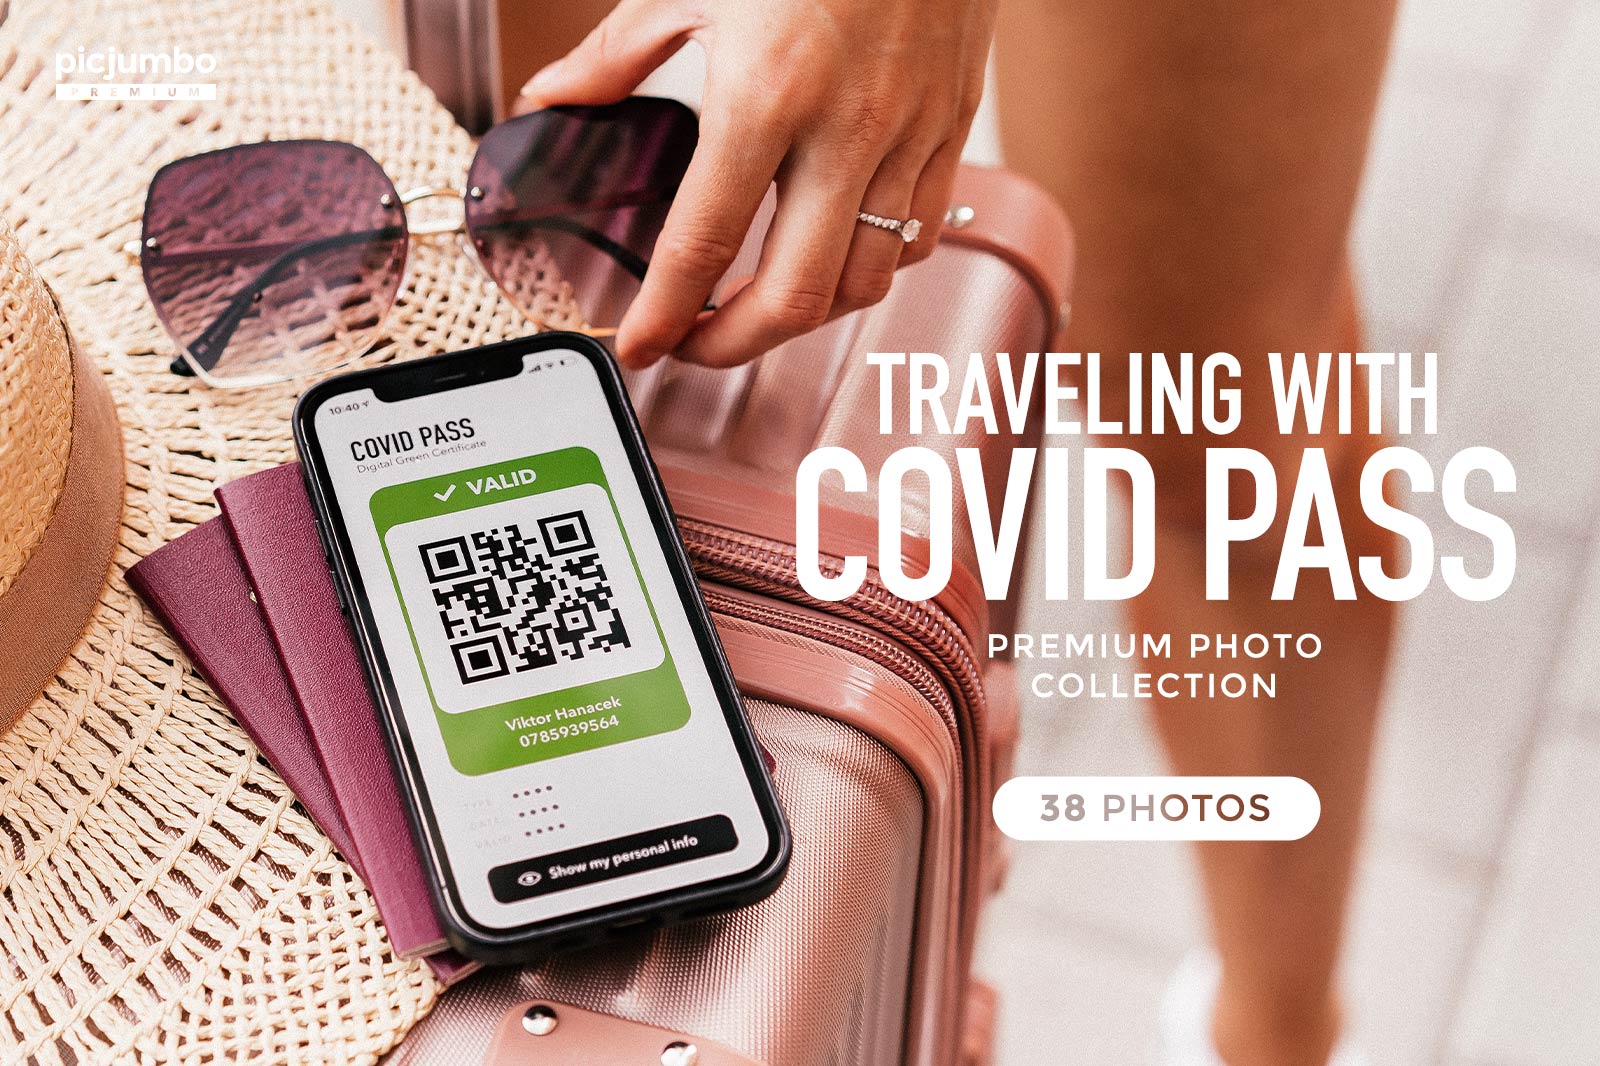 Download hi-res stock photos from our Traveling with Covid Pass PREMIUM Collection!